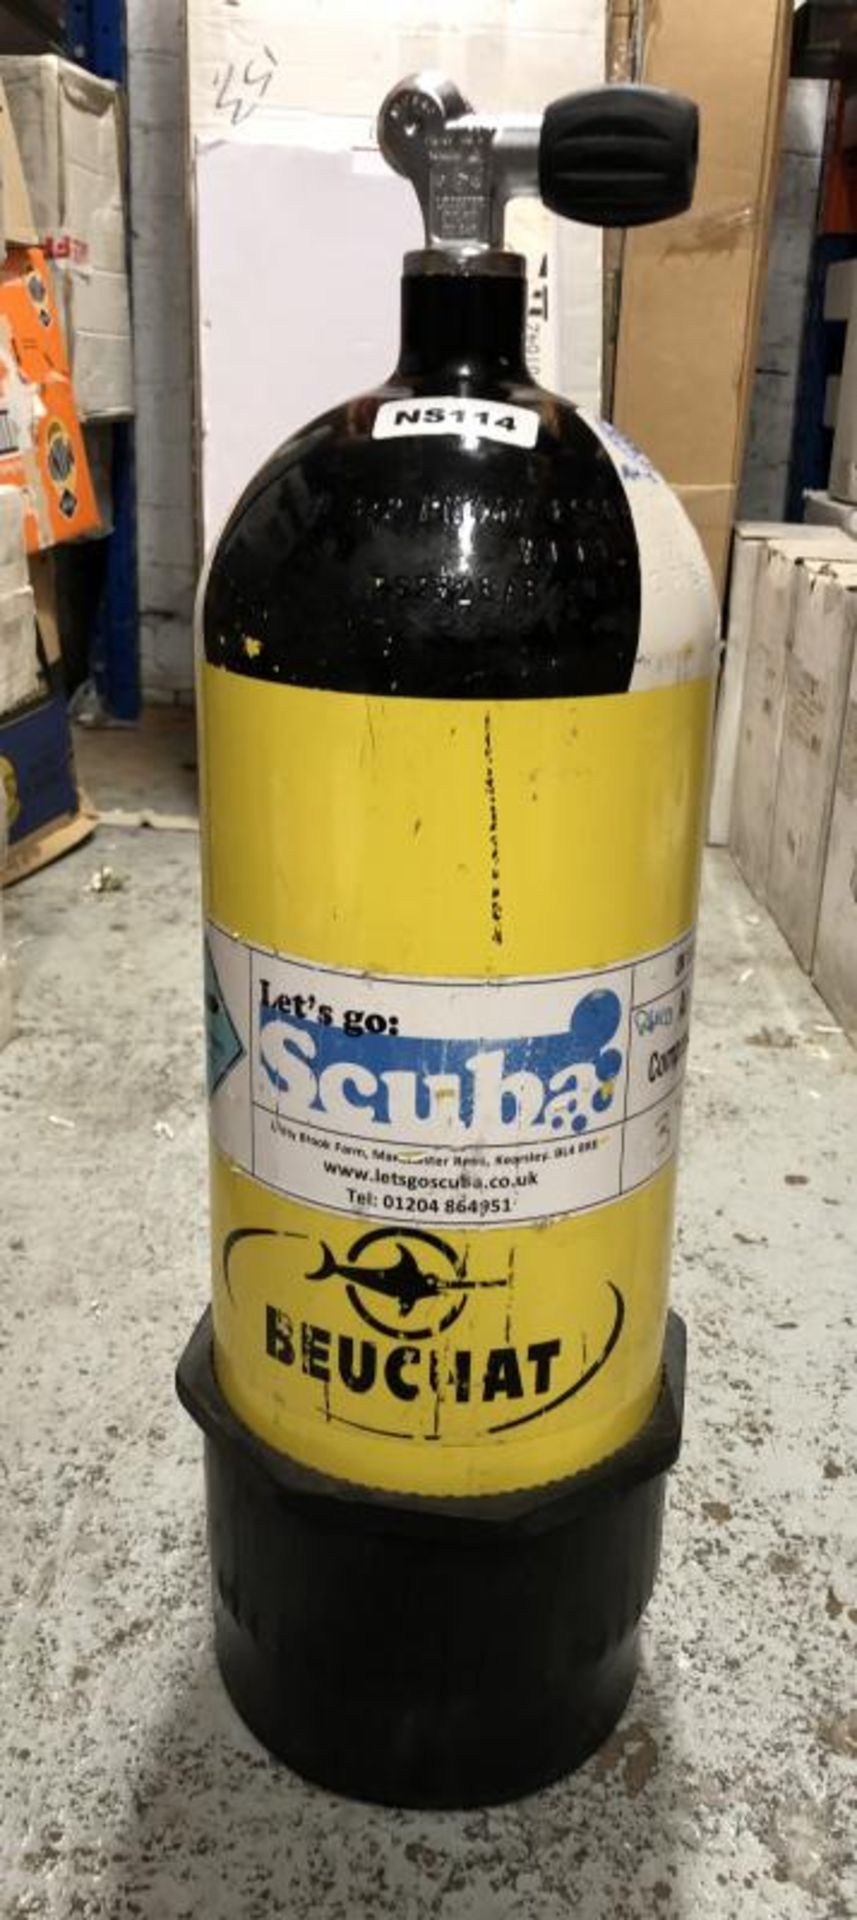 Beuchat Scuba Air Cylinder and a Full Regulator Set - Ref: NS114, NS321 - CL349 - Altrincham WA14 - Image 4 of 12